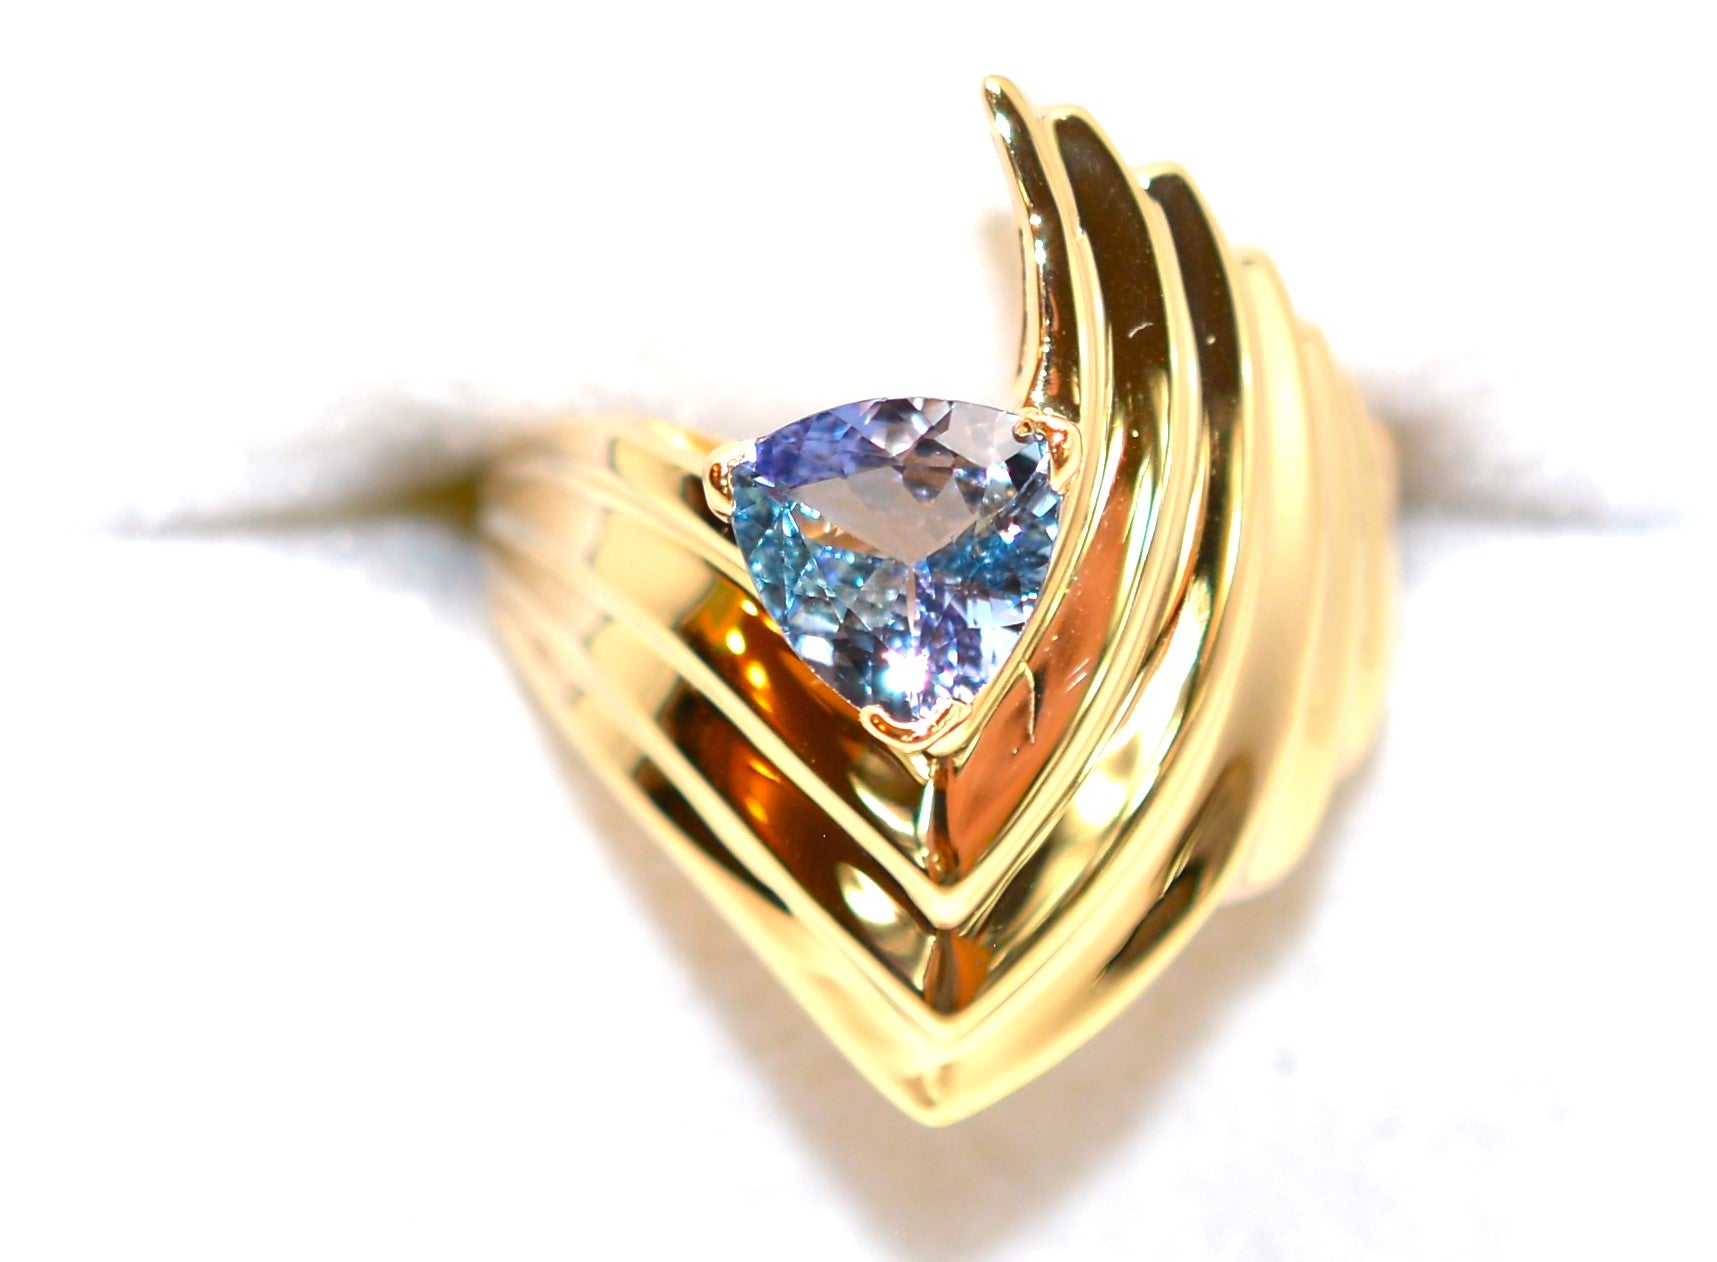 Natural Peacock Tanzanite Ring 14K Solid Gold 1.14ct Gemstone Ring Solitaire Ring December Birthstone Ring Vintage Ring Statement Jewellery